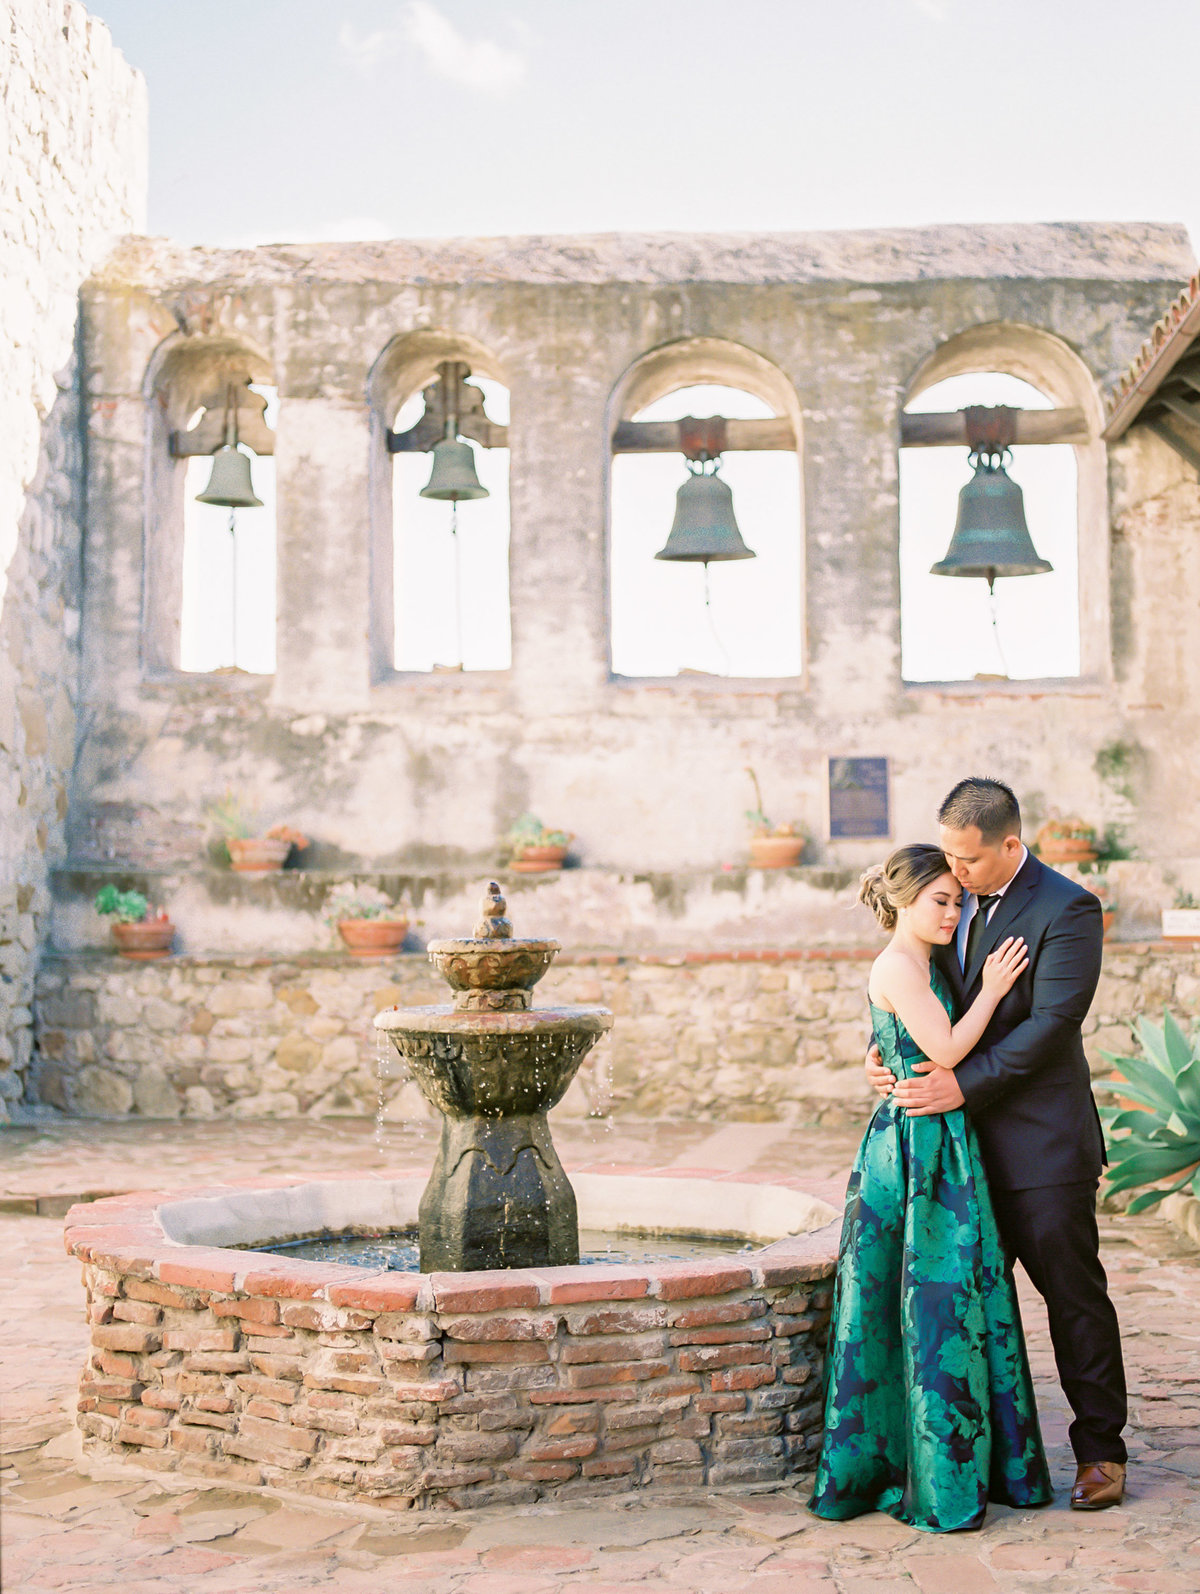 Babsie-Ly-Photography-San-Juan-Capistrano-Missions-Engagement-Session-Asian-Photographer-003